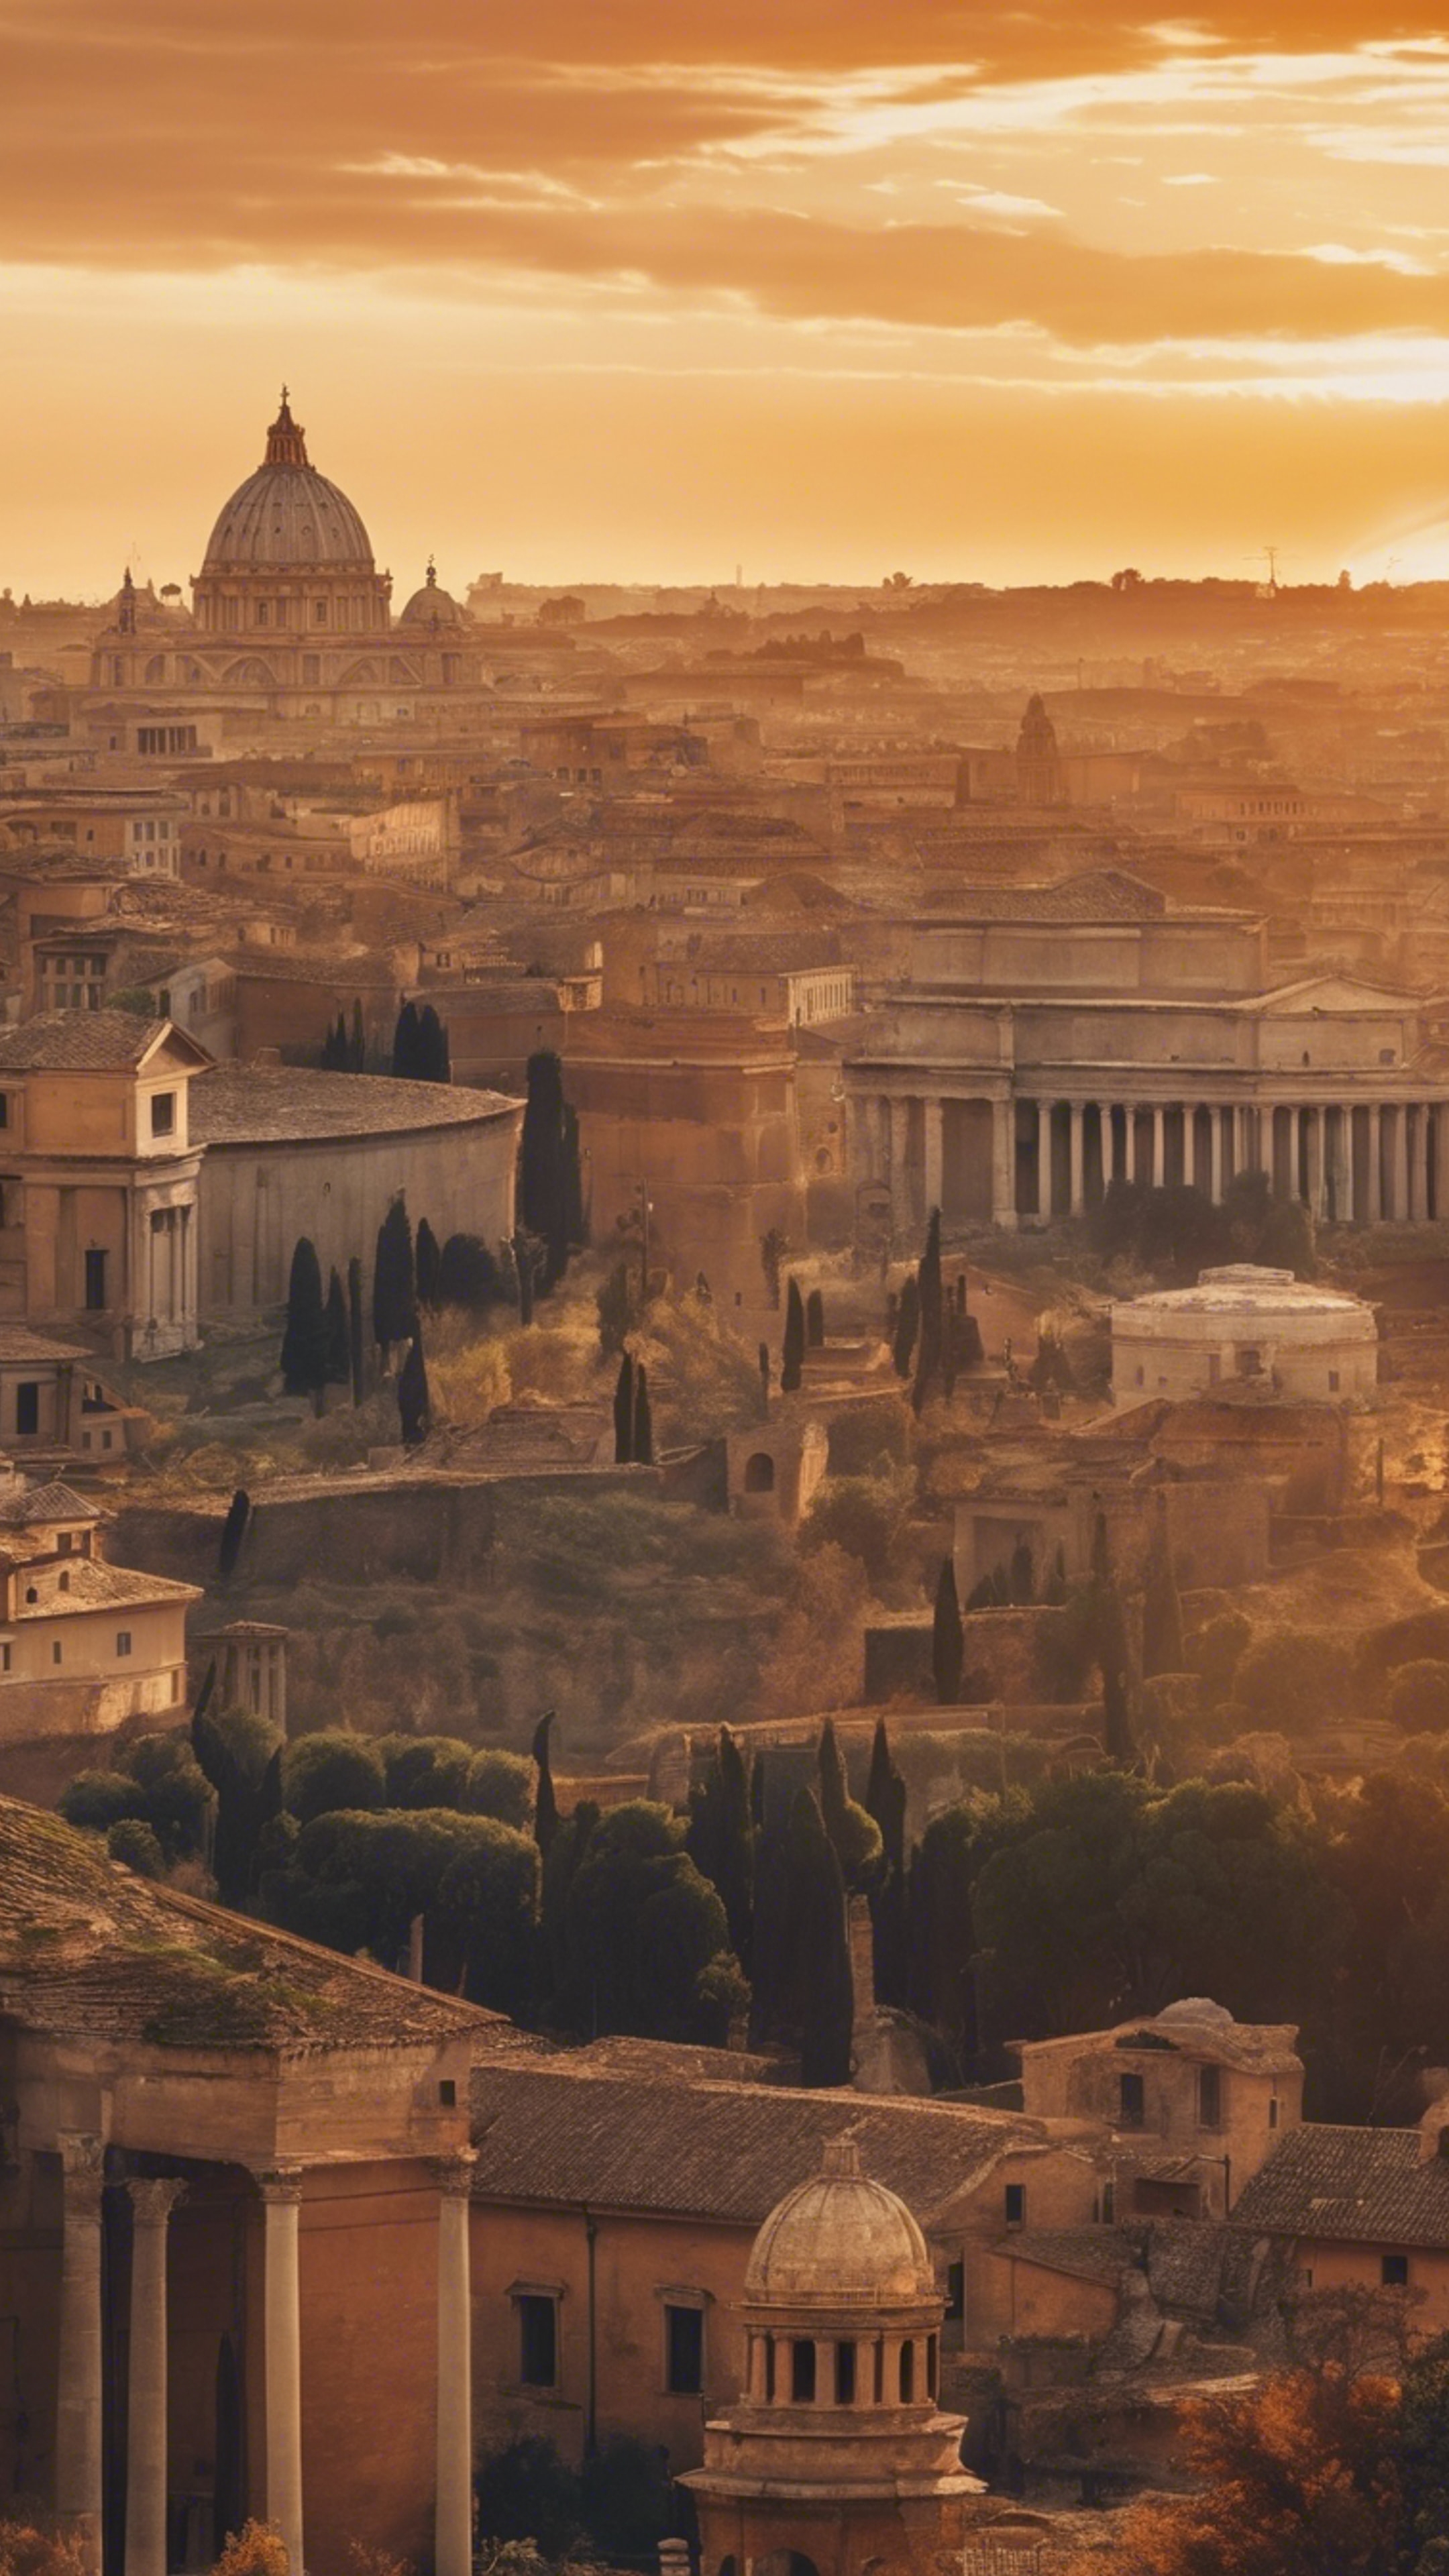 A mystic skyline of ancient Rome, dotted with colossal monuments under the orange sunset.壁紙[ef16bb82526f49c7a632]